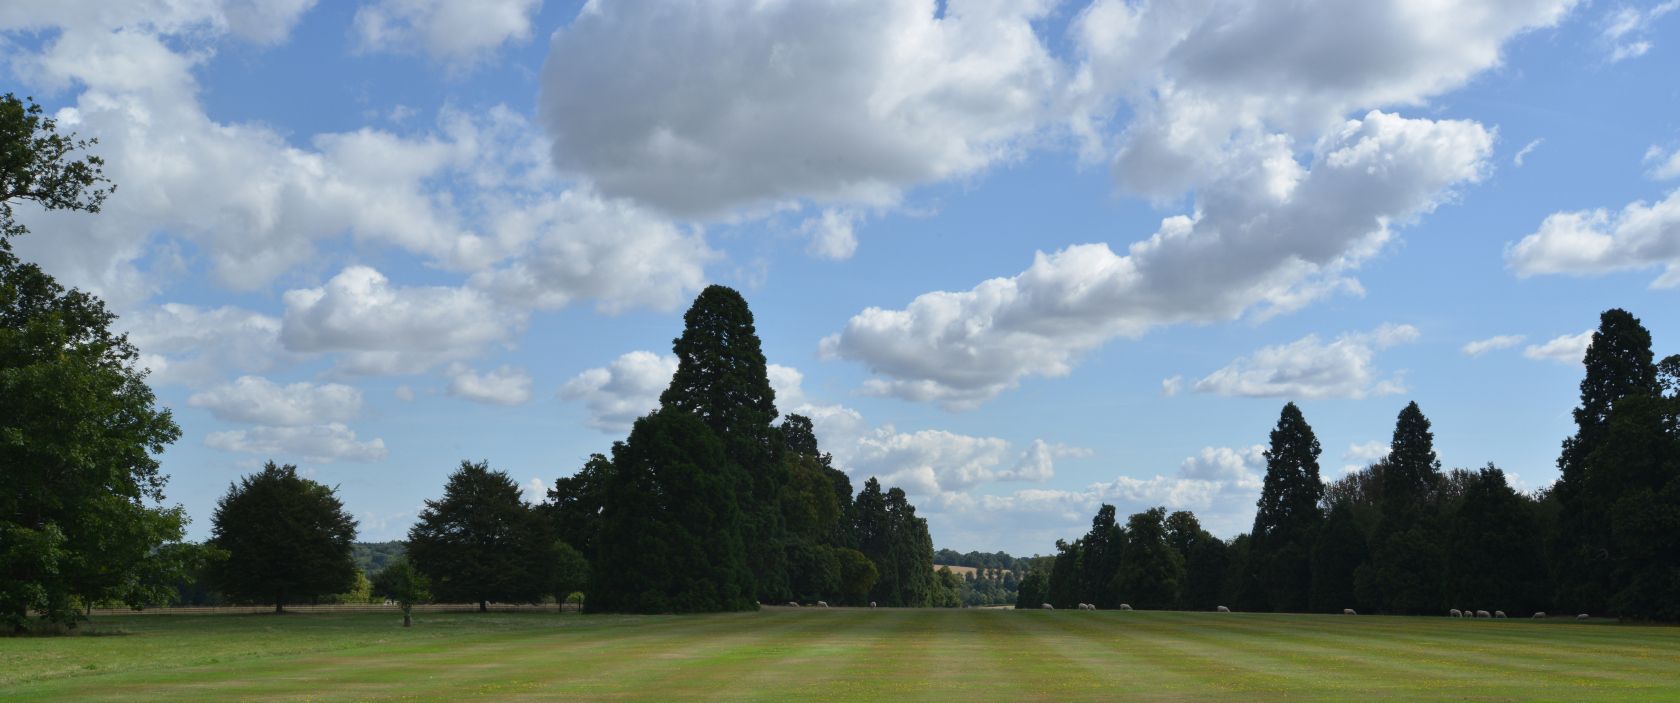 The front lawn at Gorhambury Estate, St Albans